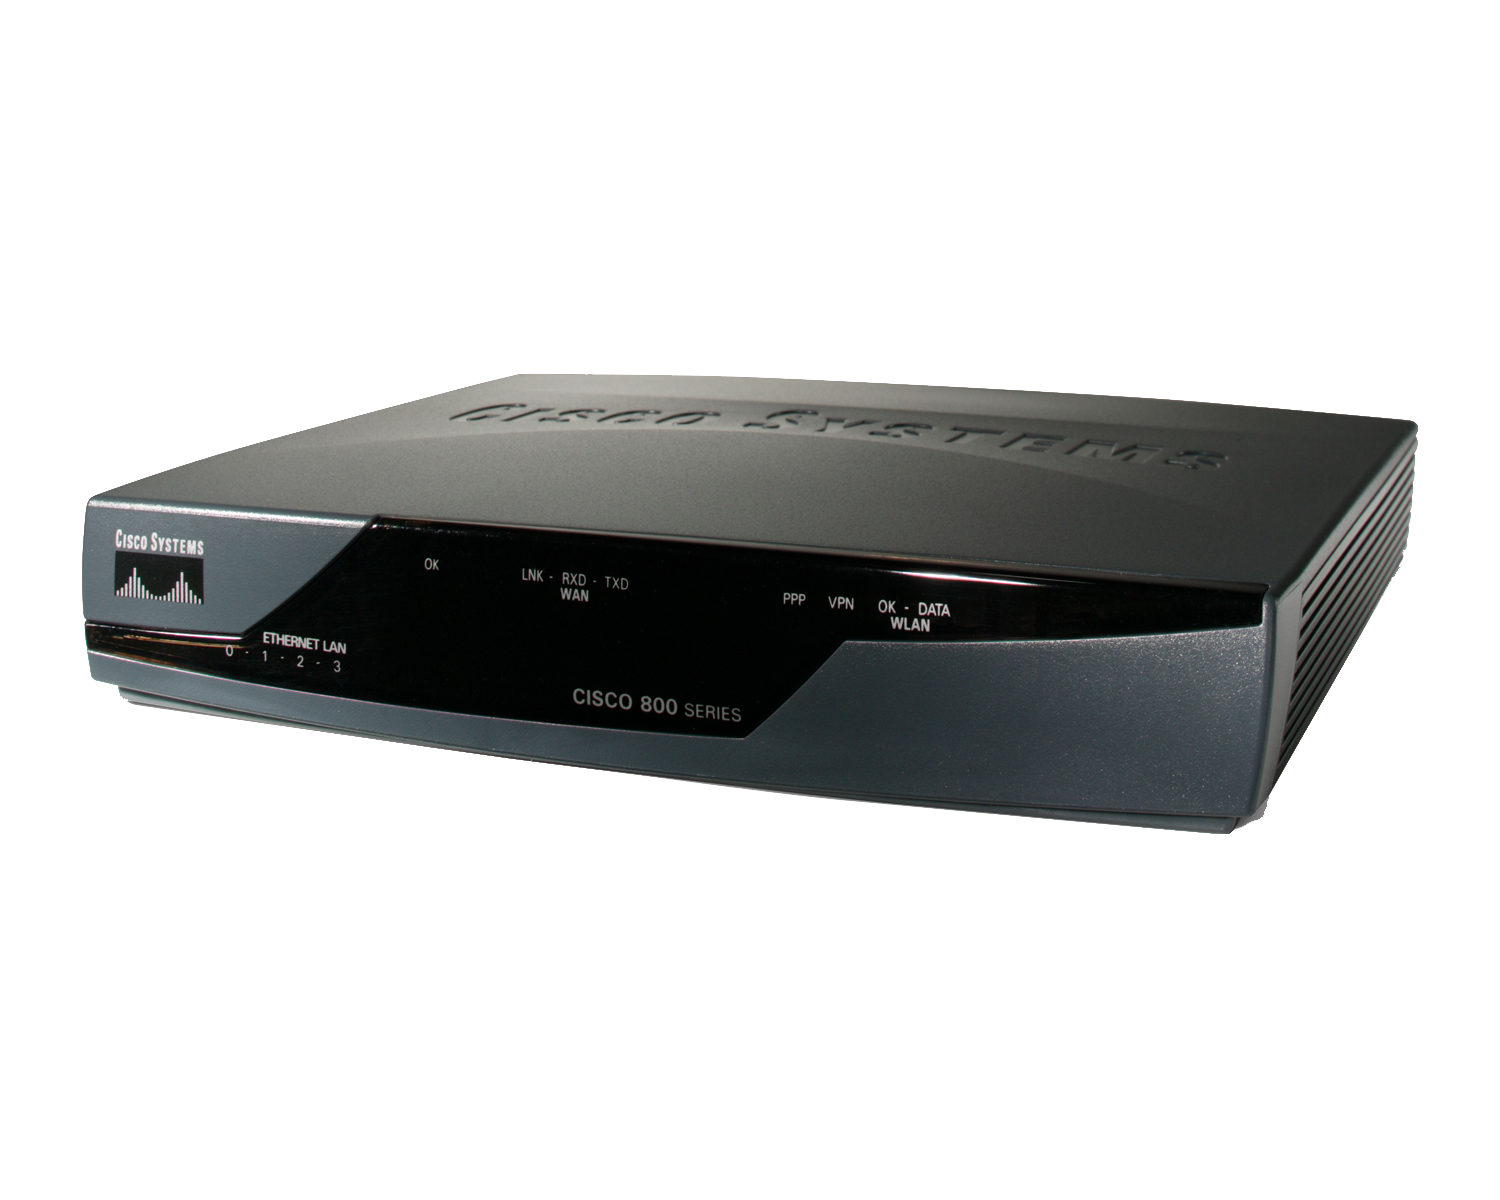 Cisco Routers 830 Series